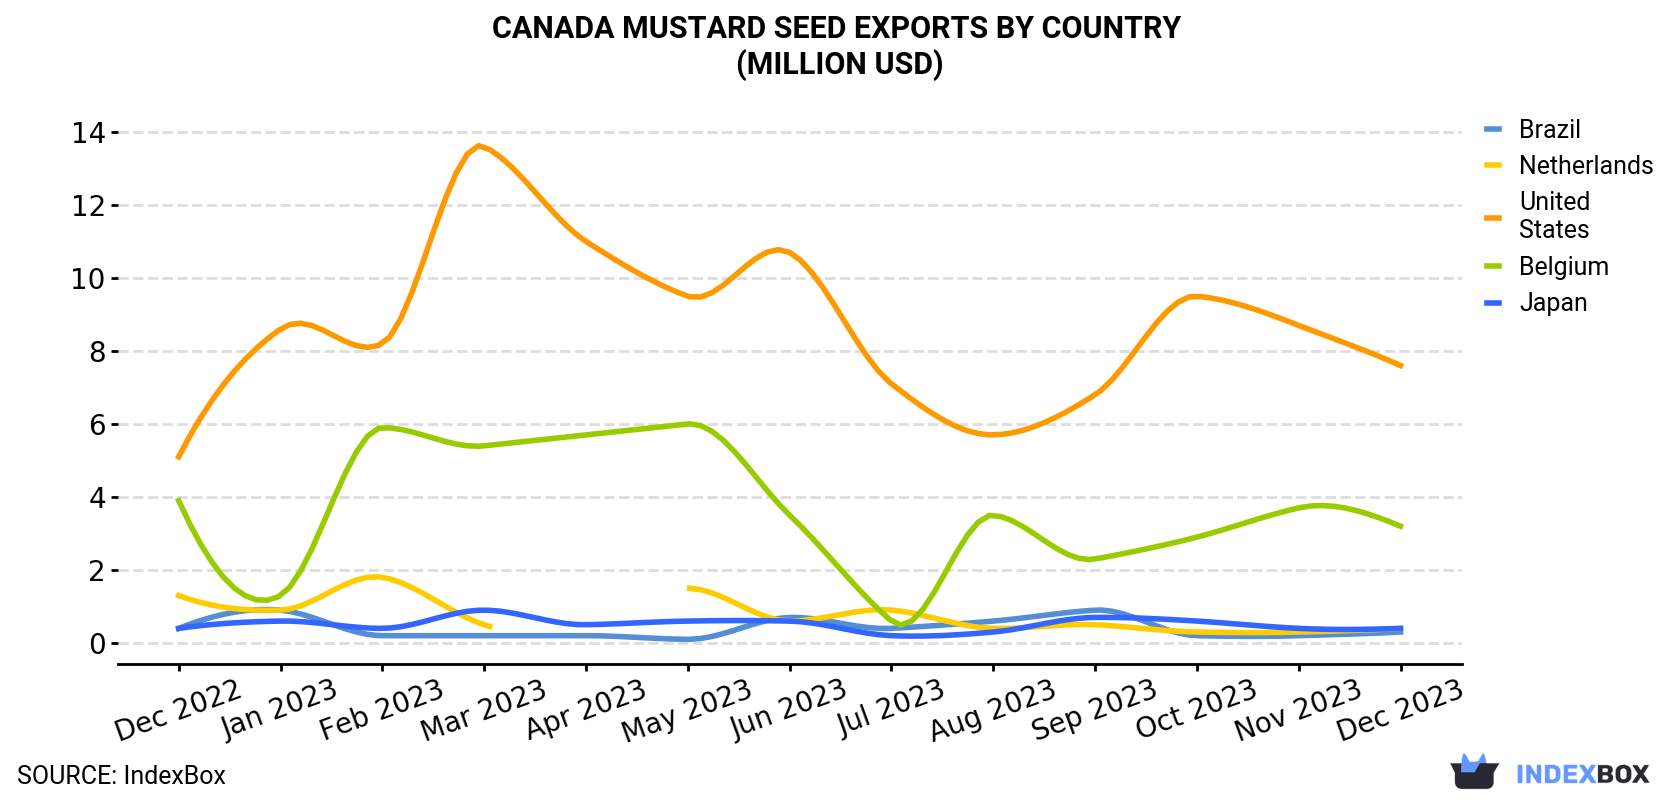 Canada Mustard Seed Exports By Country (Million USD)